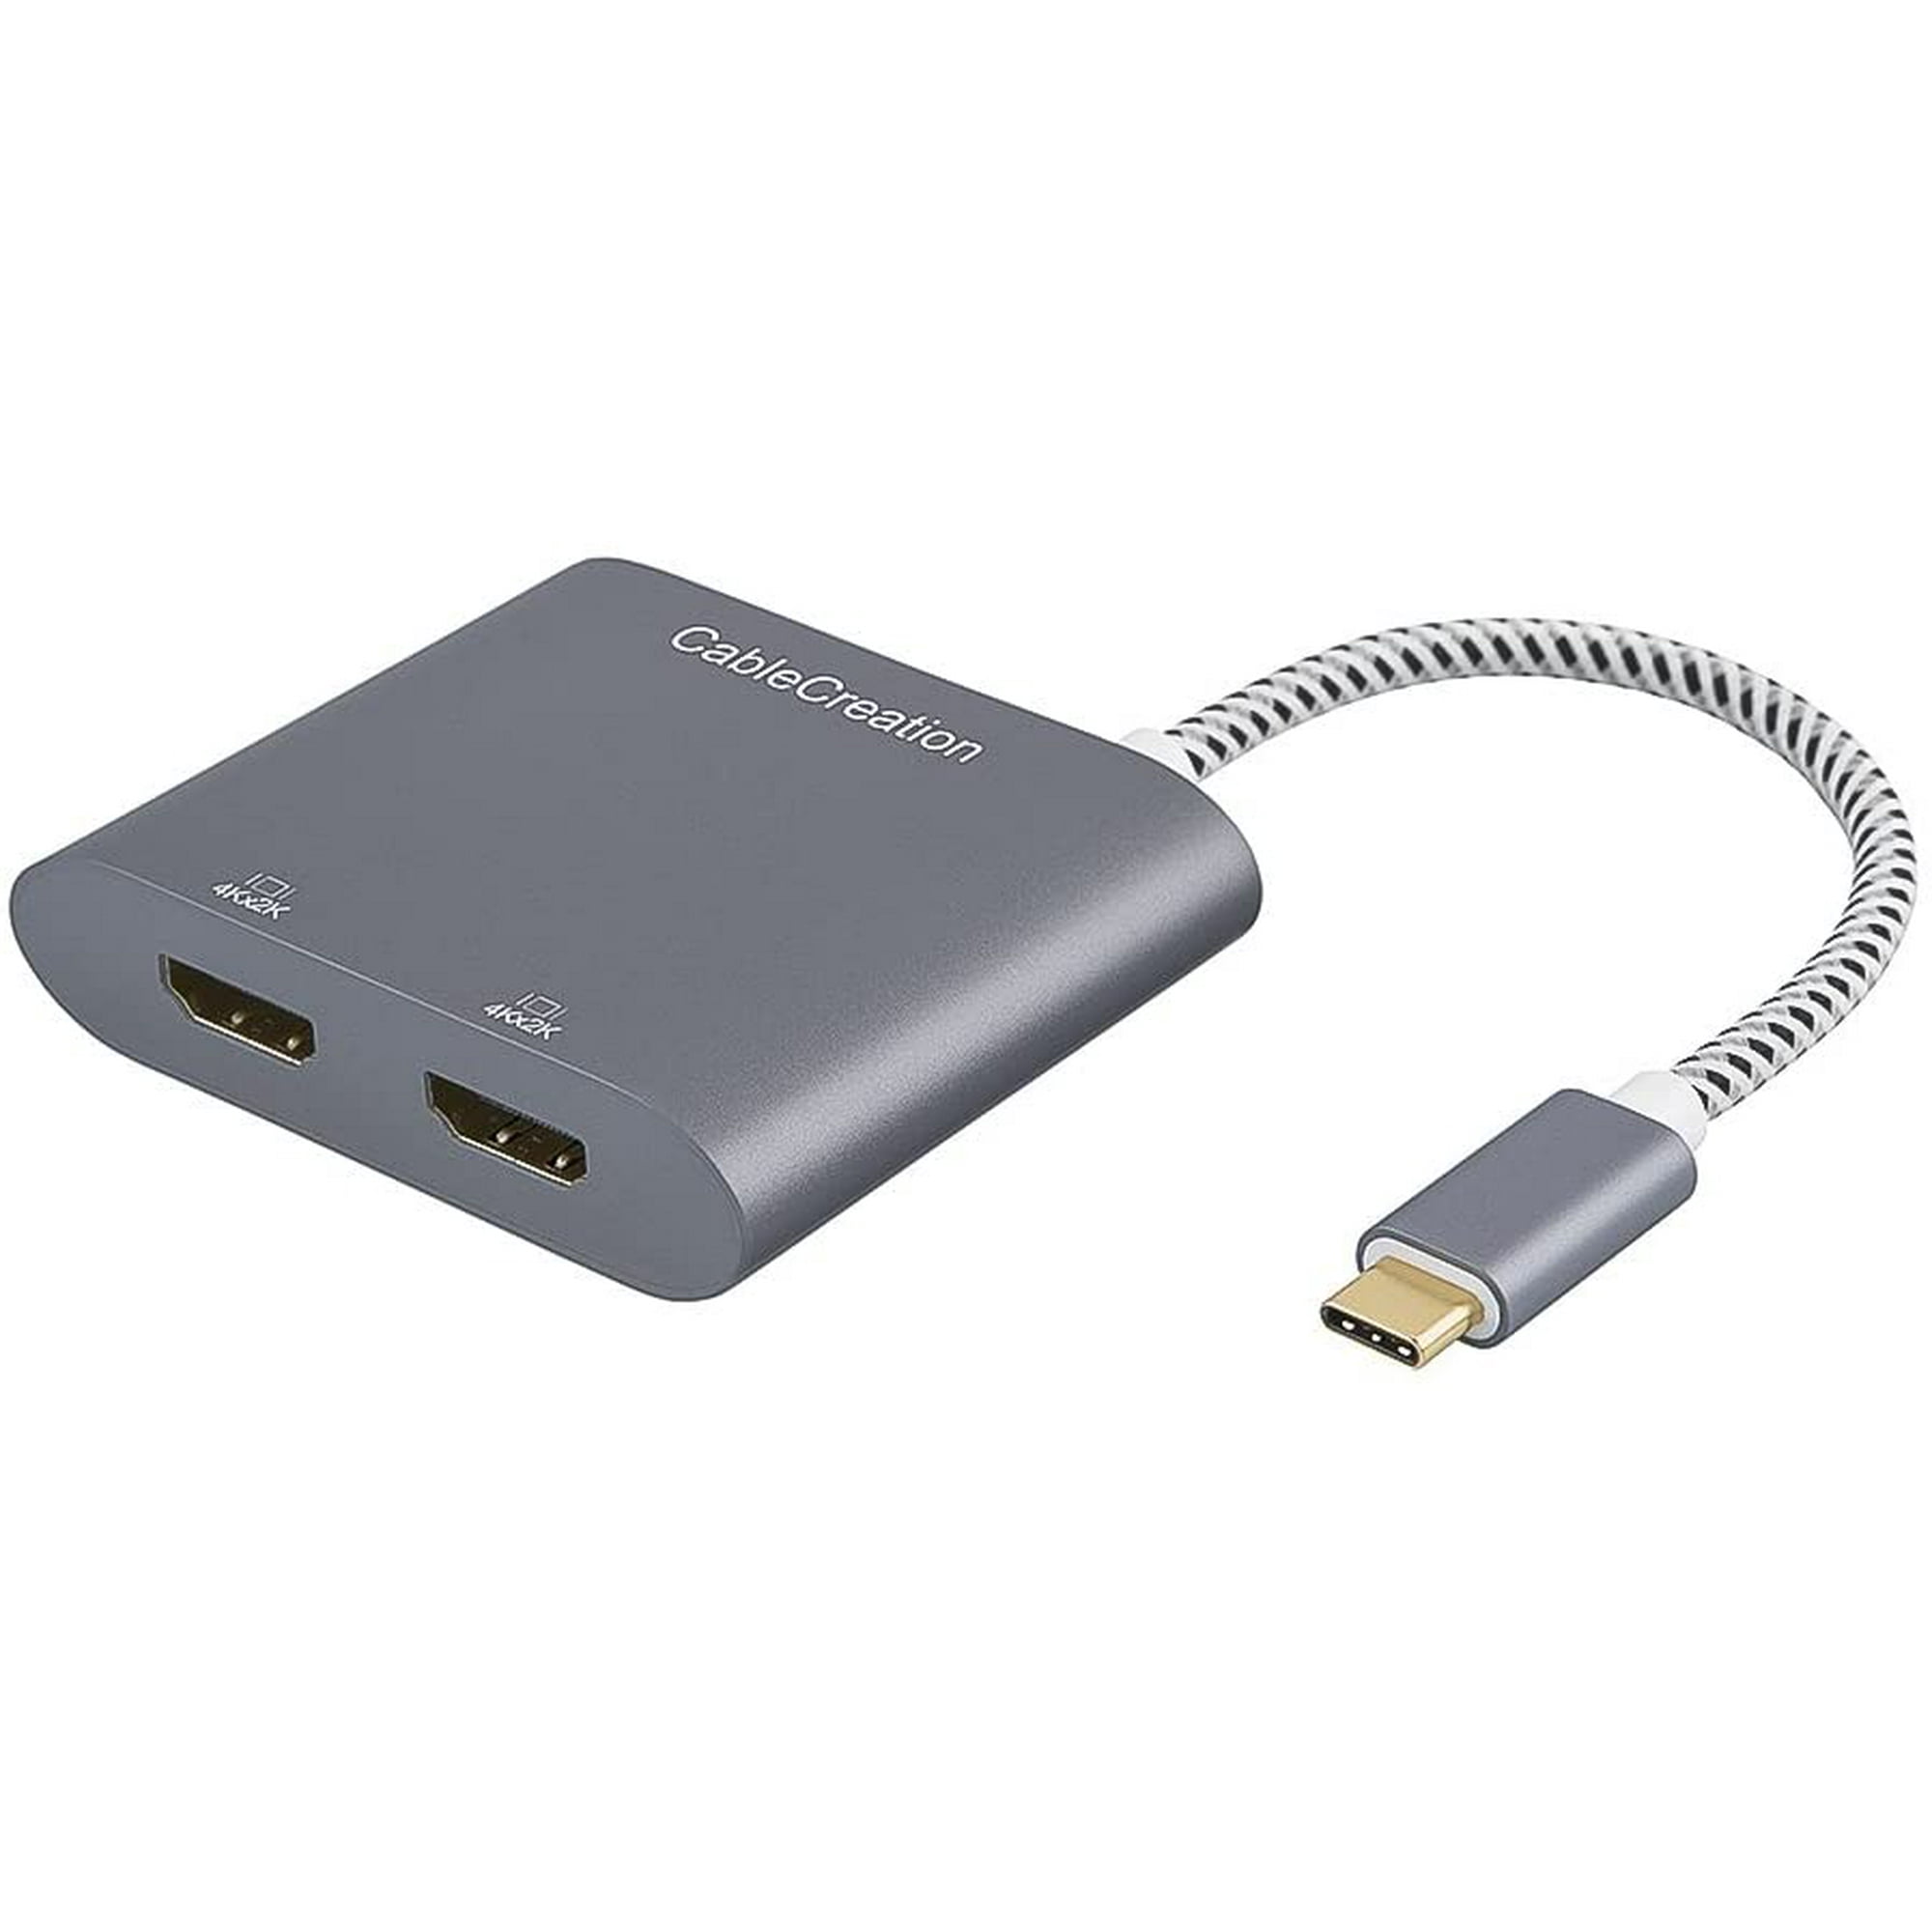 USB C to Dual HDMI 4K, CableCreation USB Type C (Compatible Thunderbolt 3) to 2 HDMI Adapter, Compatible with MacBook Walmart Canada